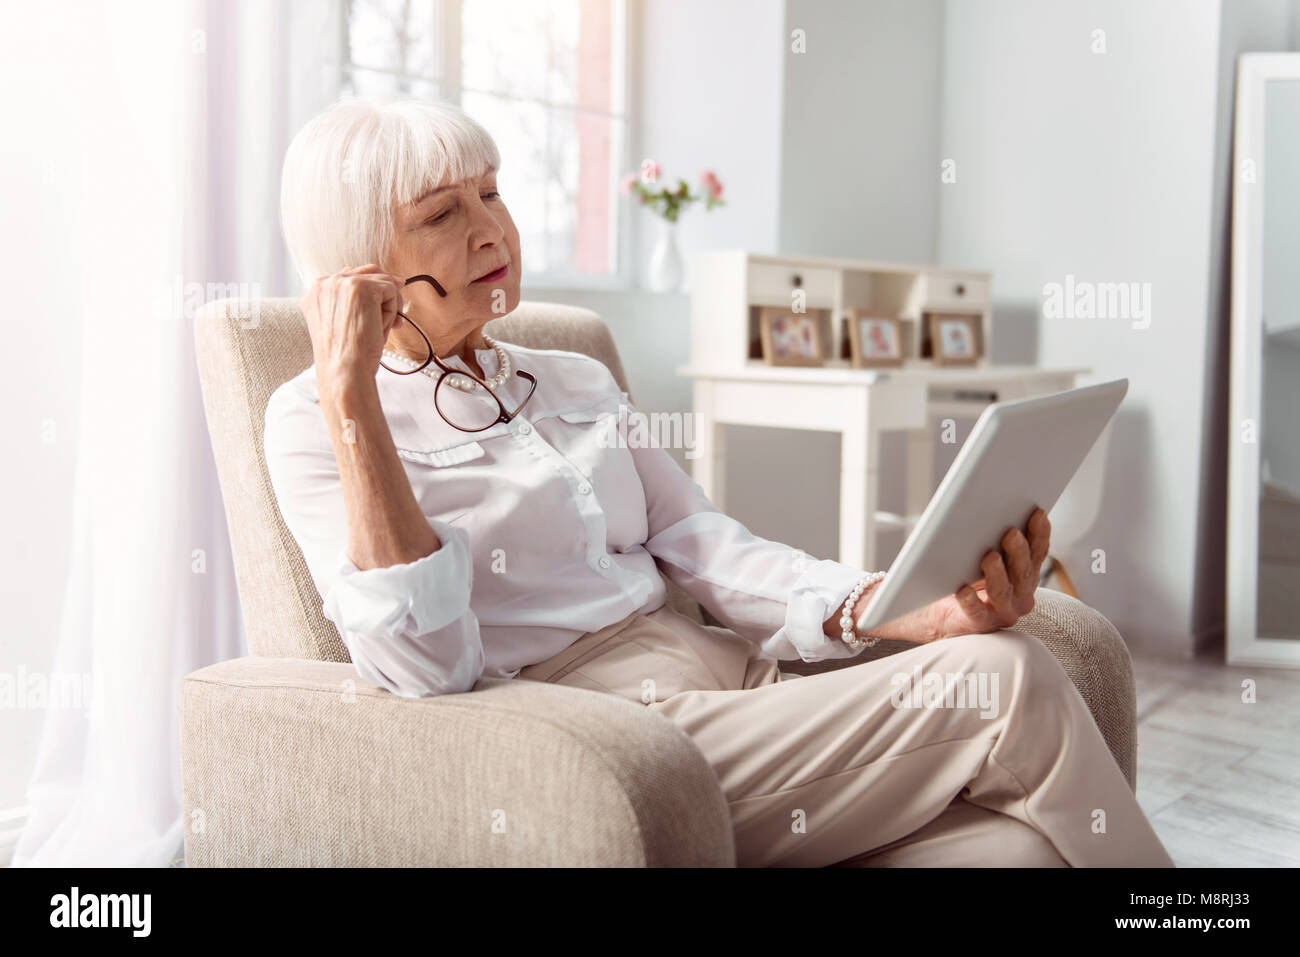 Charming elderly lady reading from tablet attentively Stock Photo